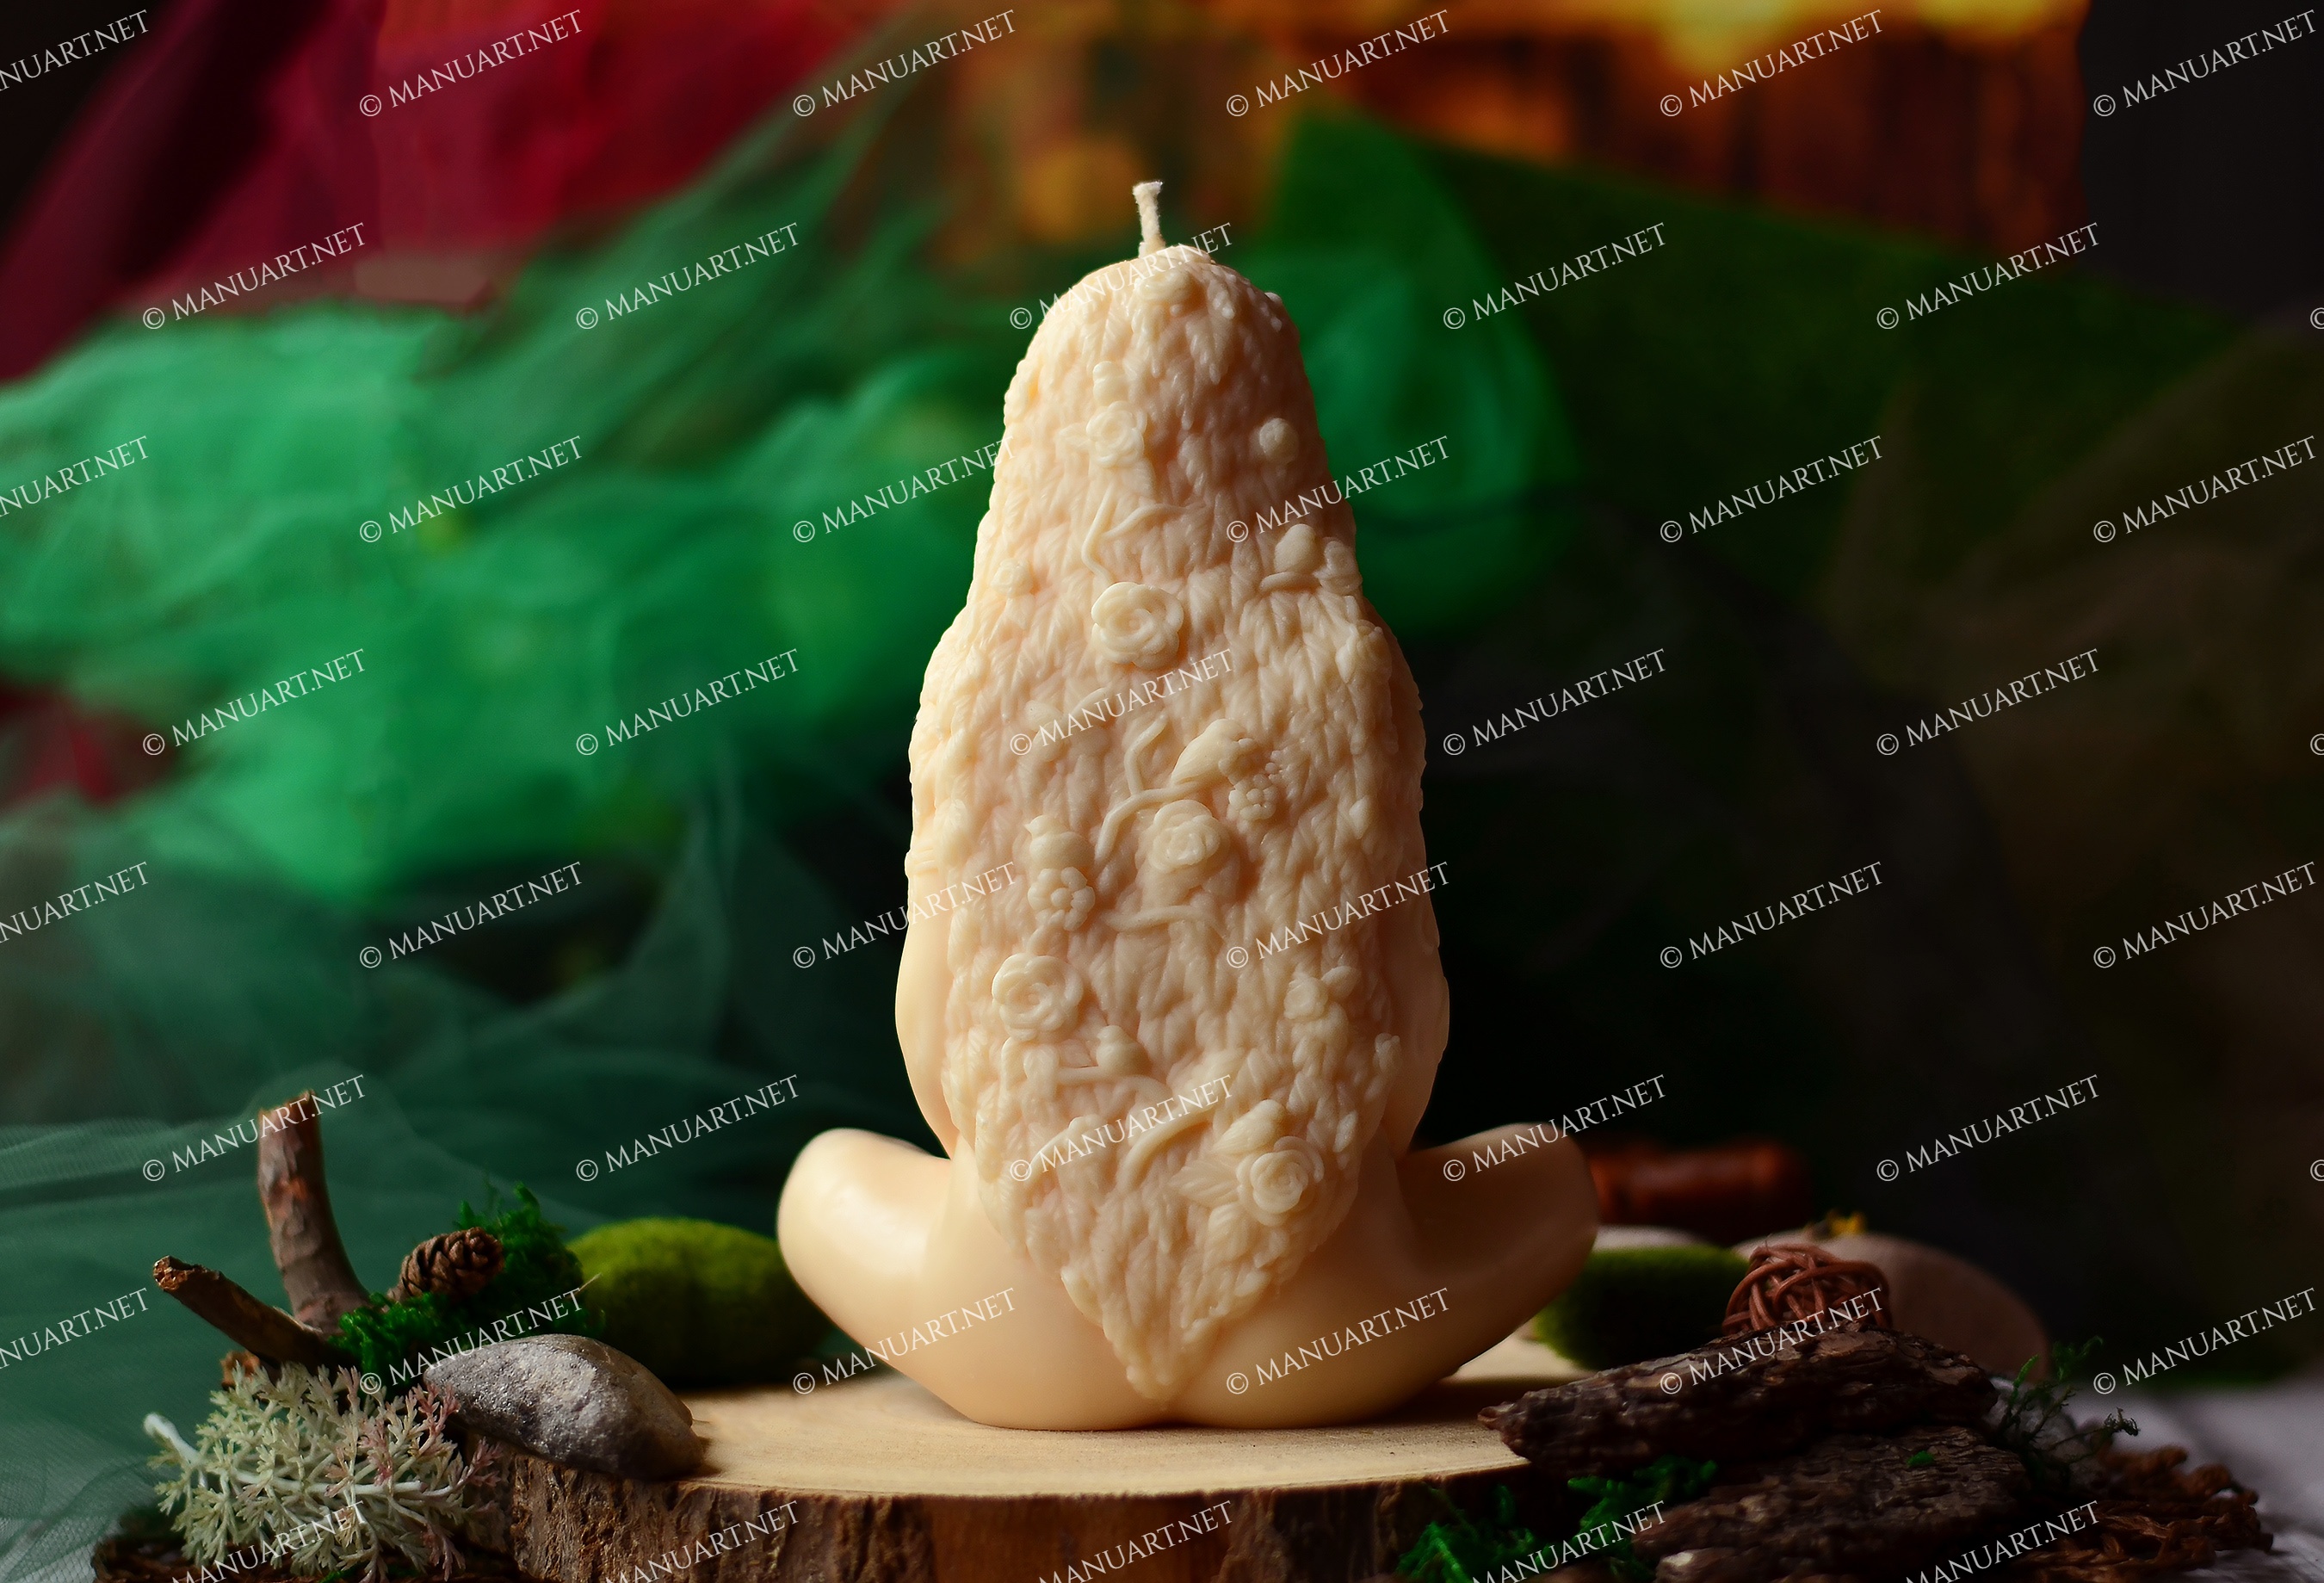 Silicone Mold - Big Mushroom Goddess 3D - for Making Soaps, Candles and Figurines